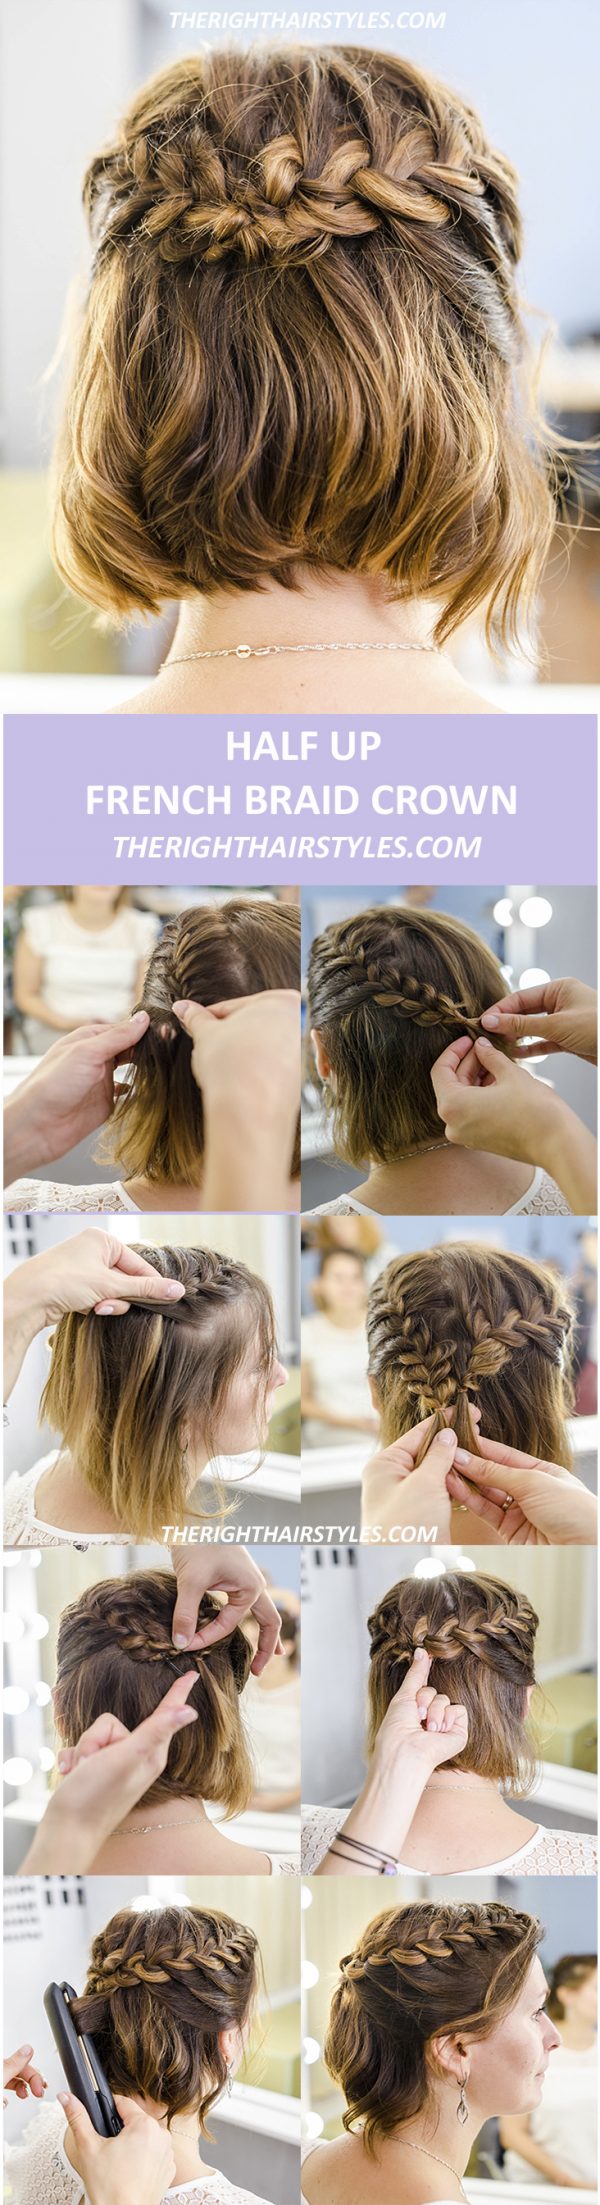 Half Up French Braid Crown For Short Hair